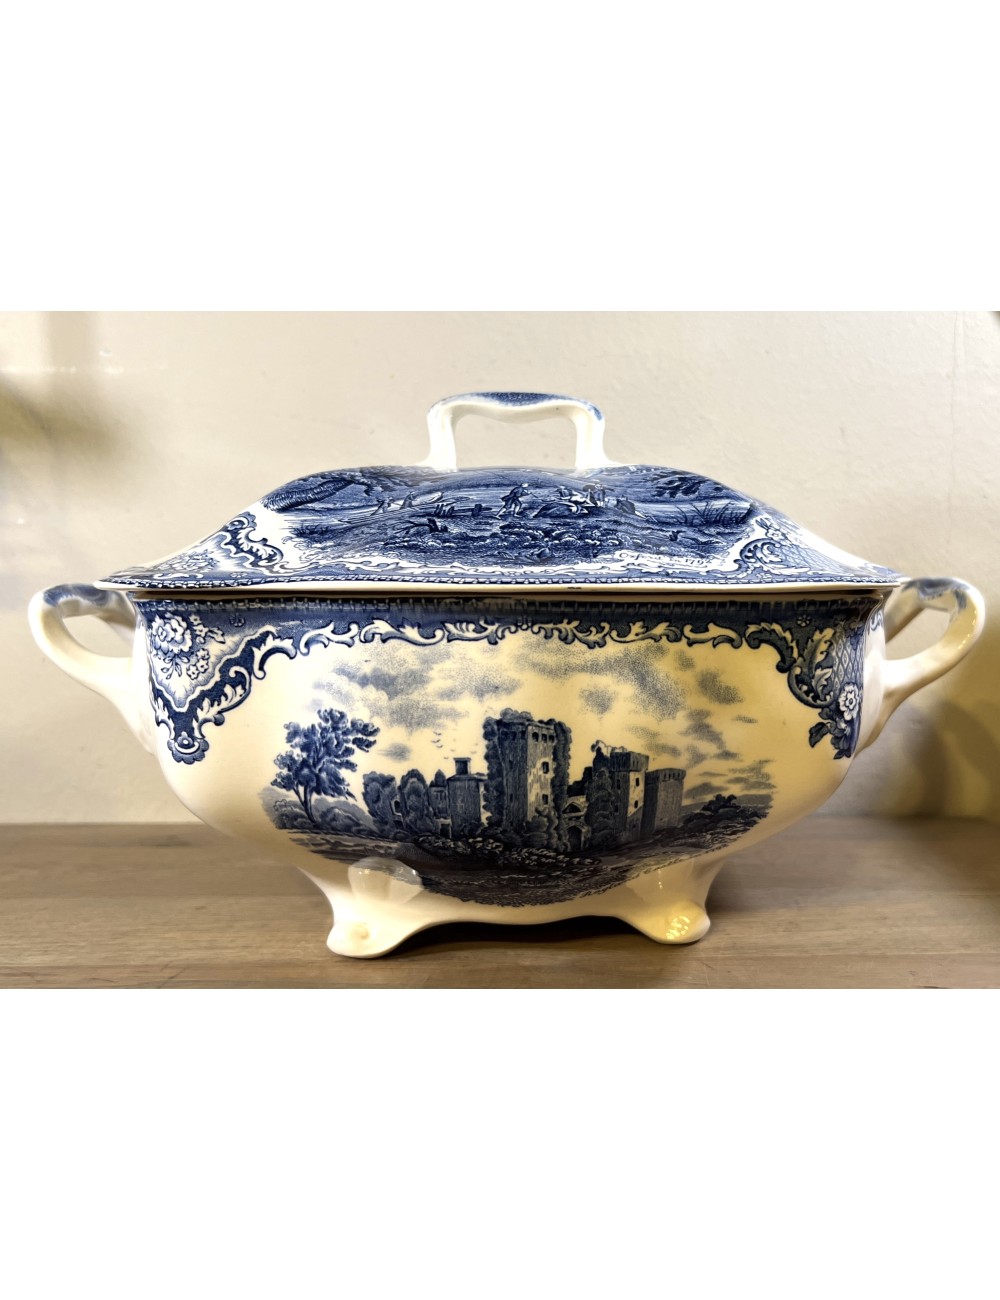 Soup tureen / Tureen - Johnson Bros England - décor OLD BRITAIN CASTLES executed in blue